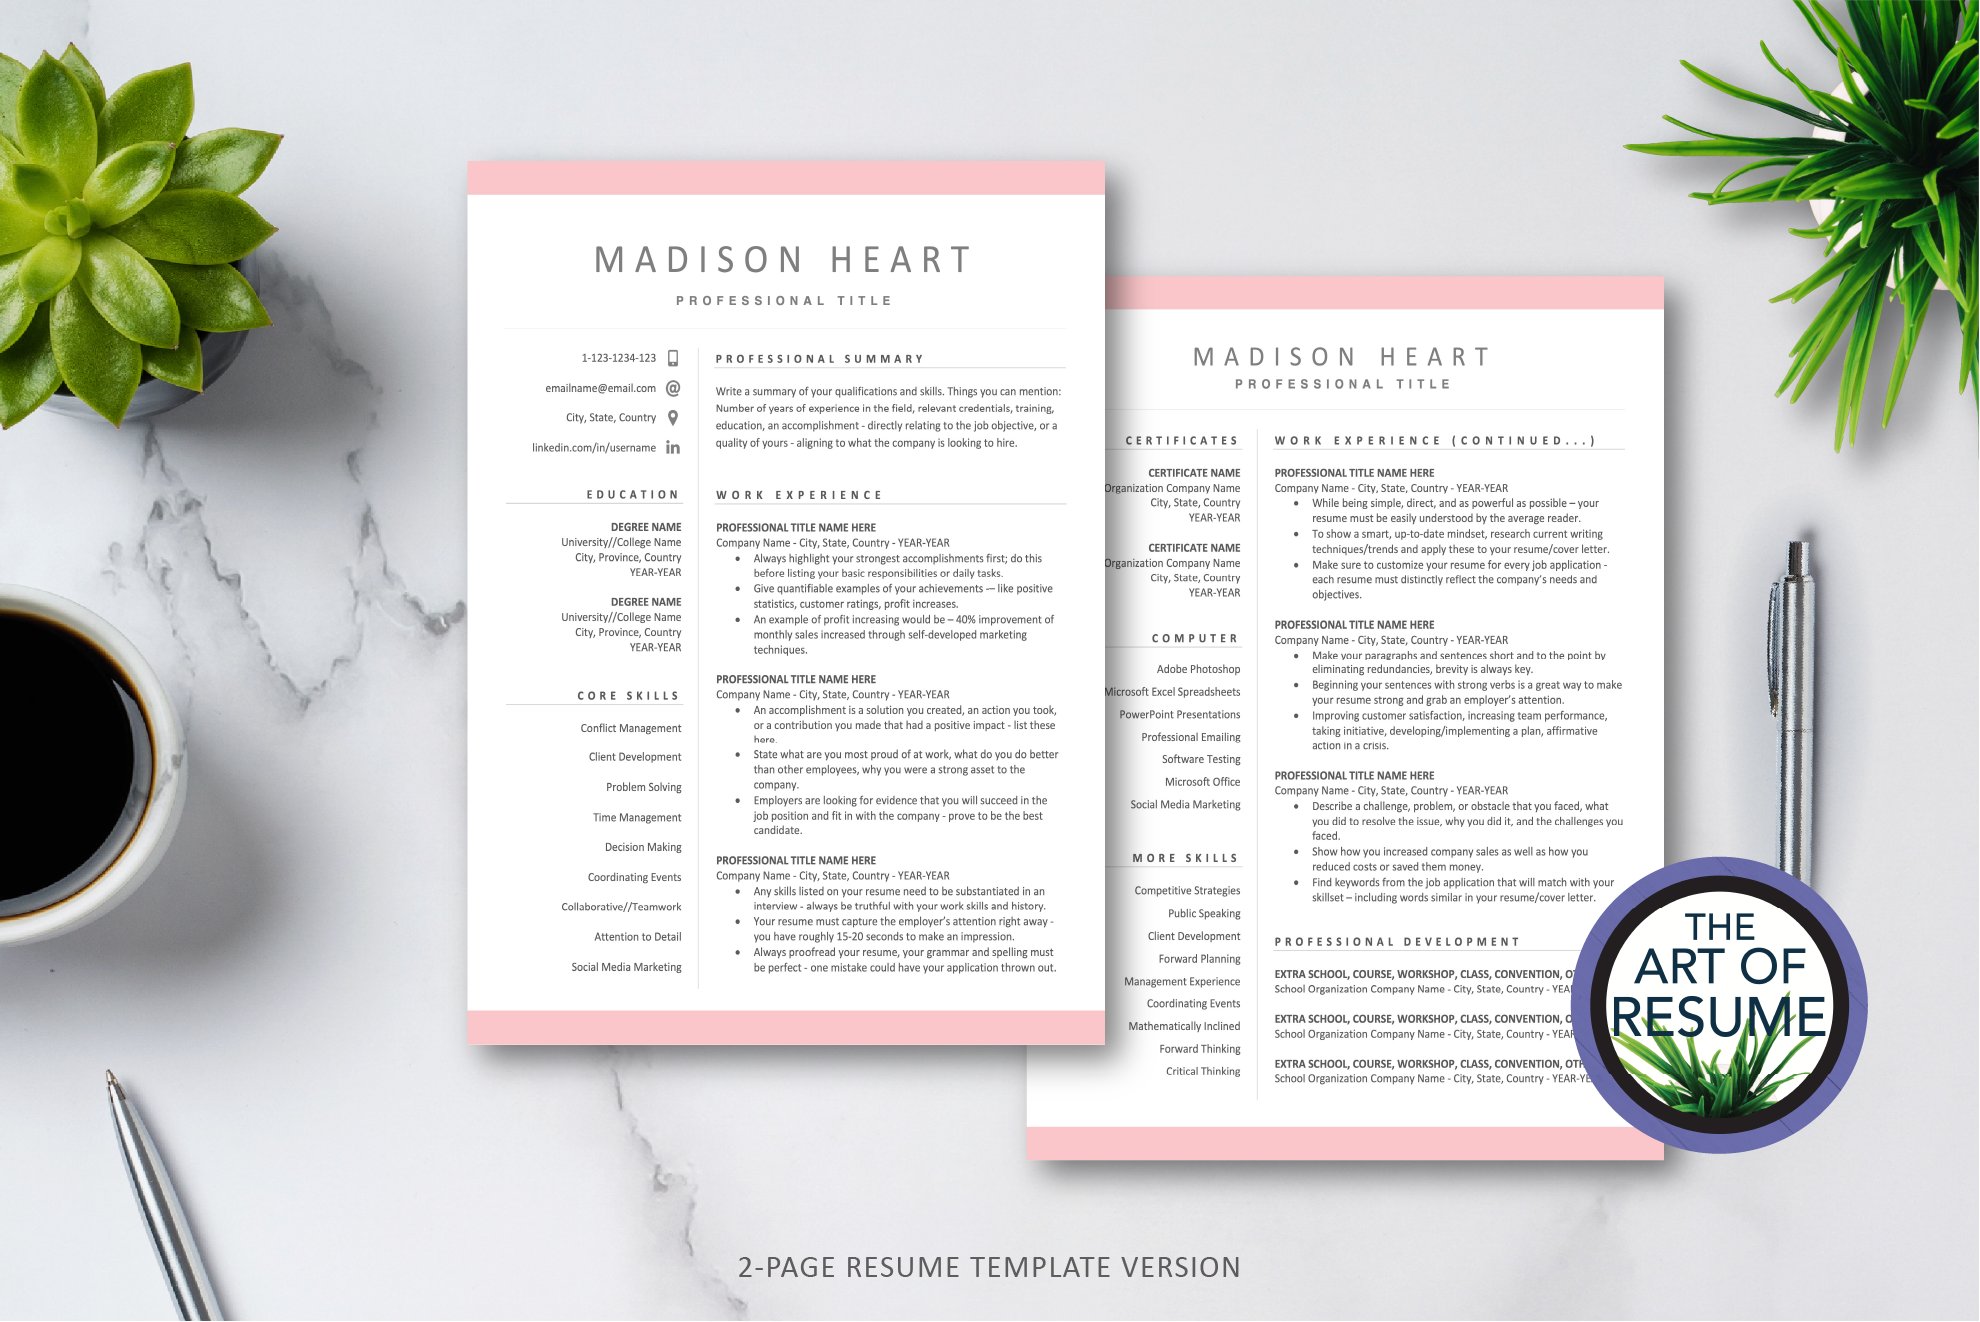 3 two resume template 992